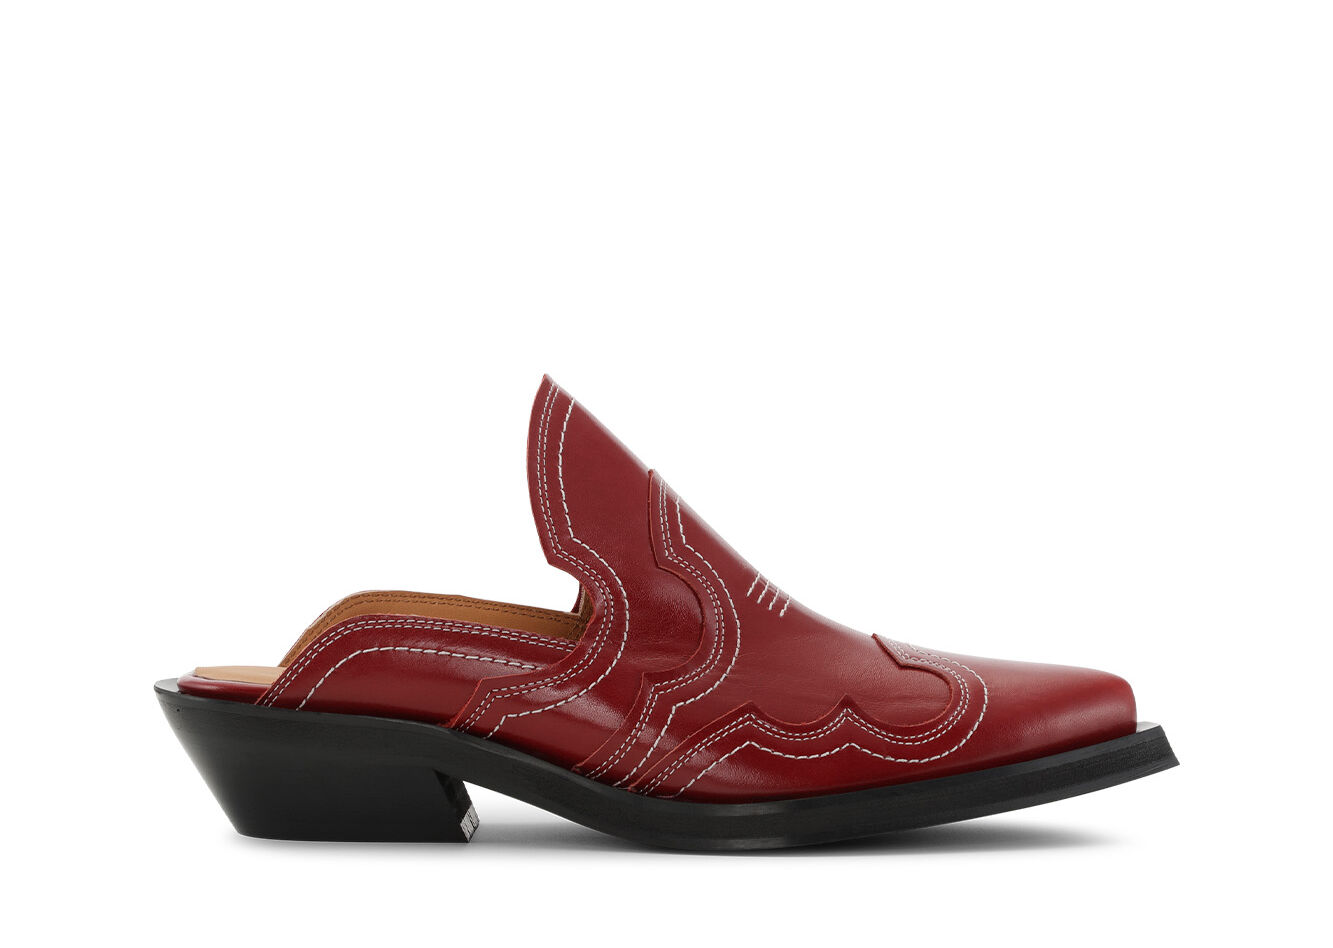 Bestickte Westernpantoletten, Calf Leather, in colour Barbados Cherry - 1 - GANNI